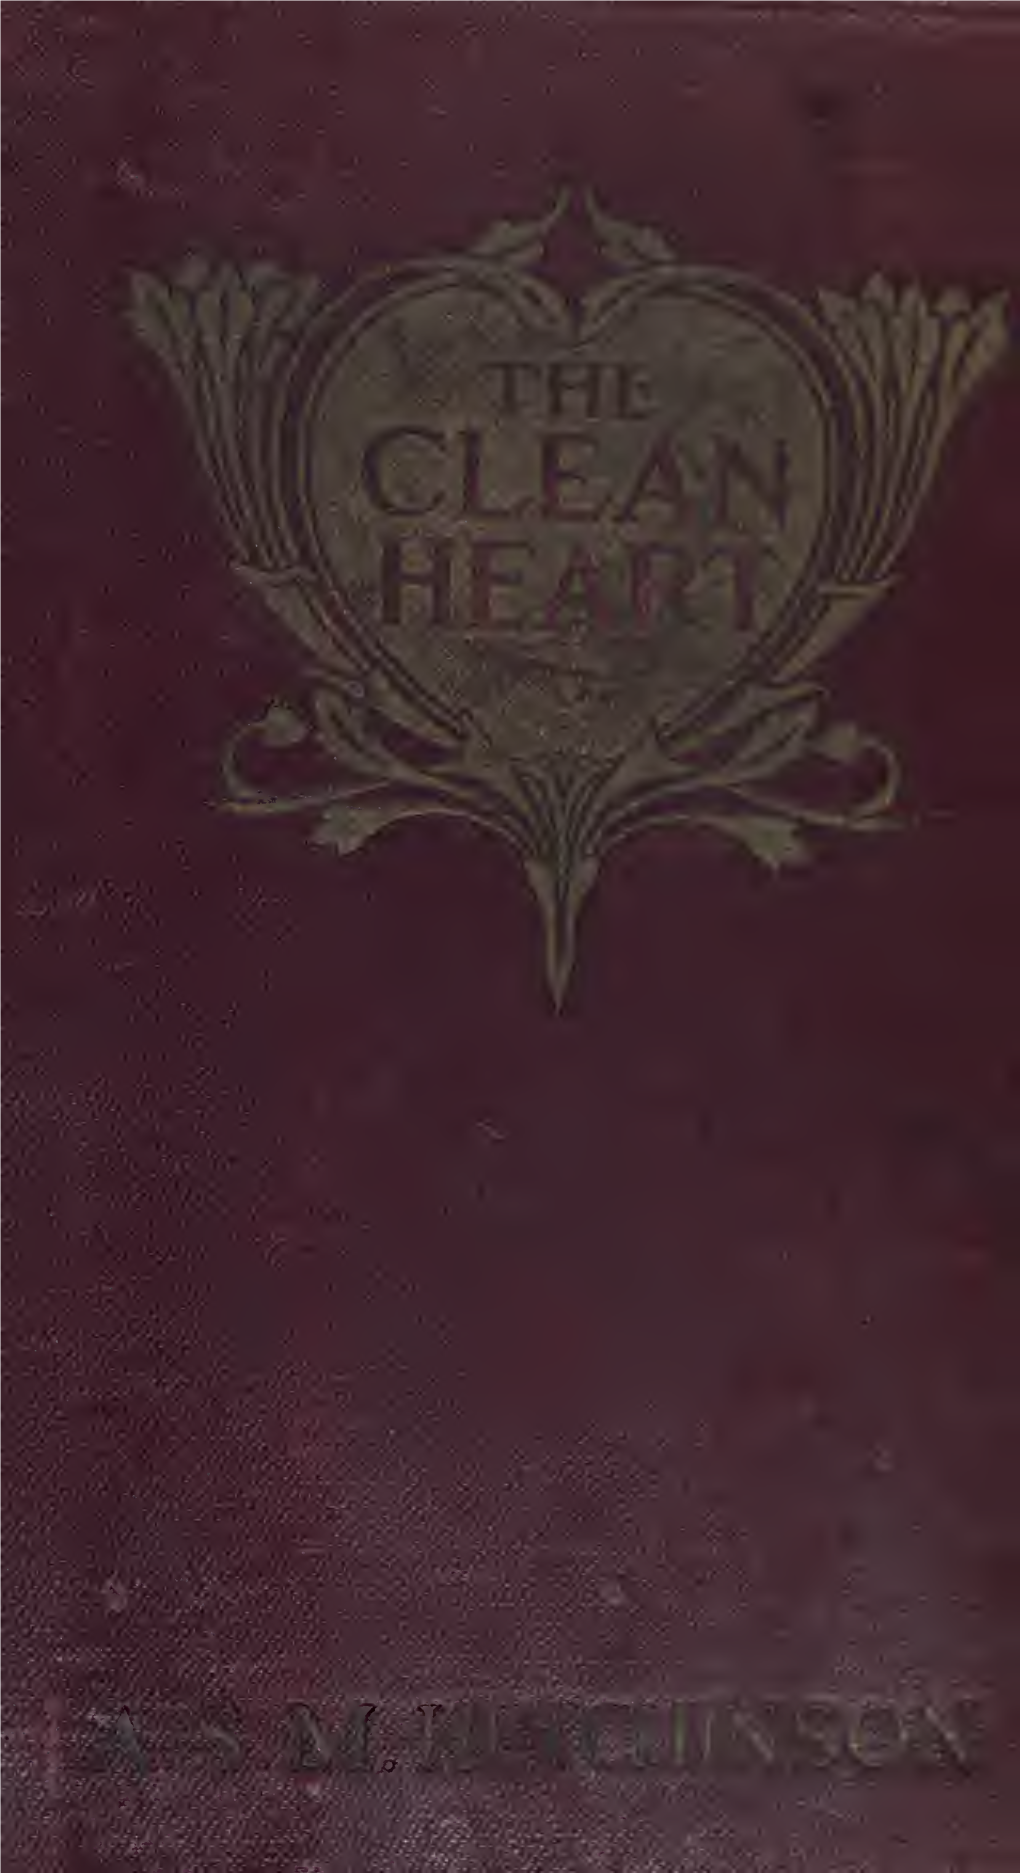 The Clean Heart